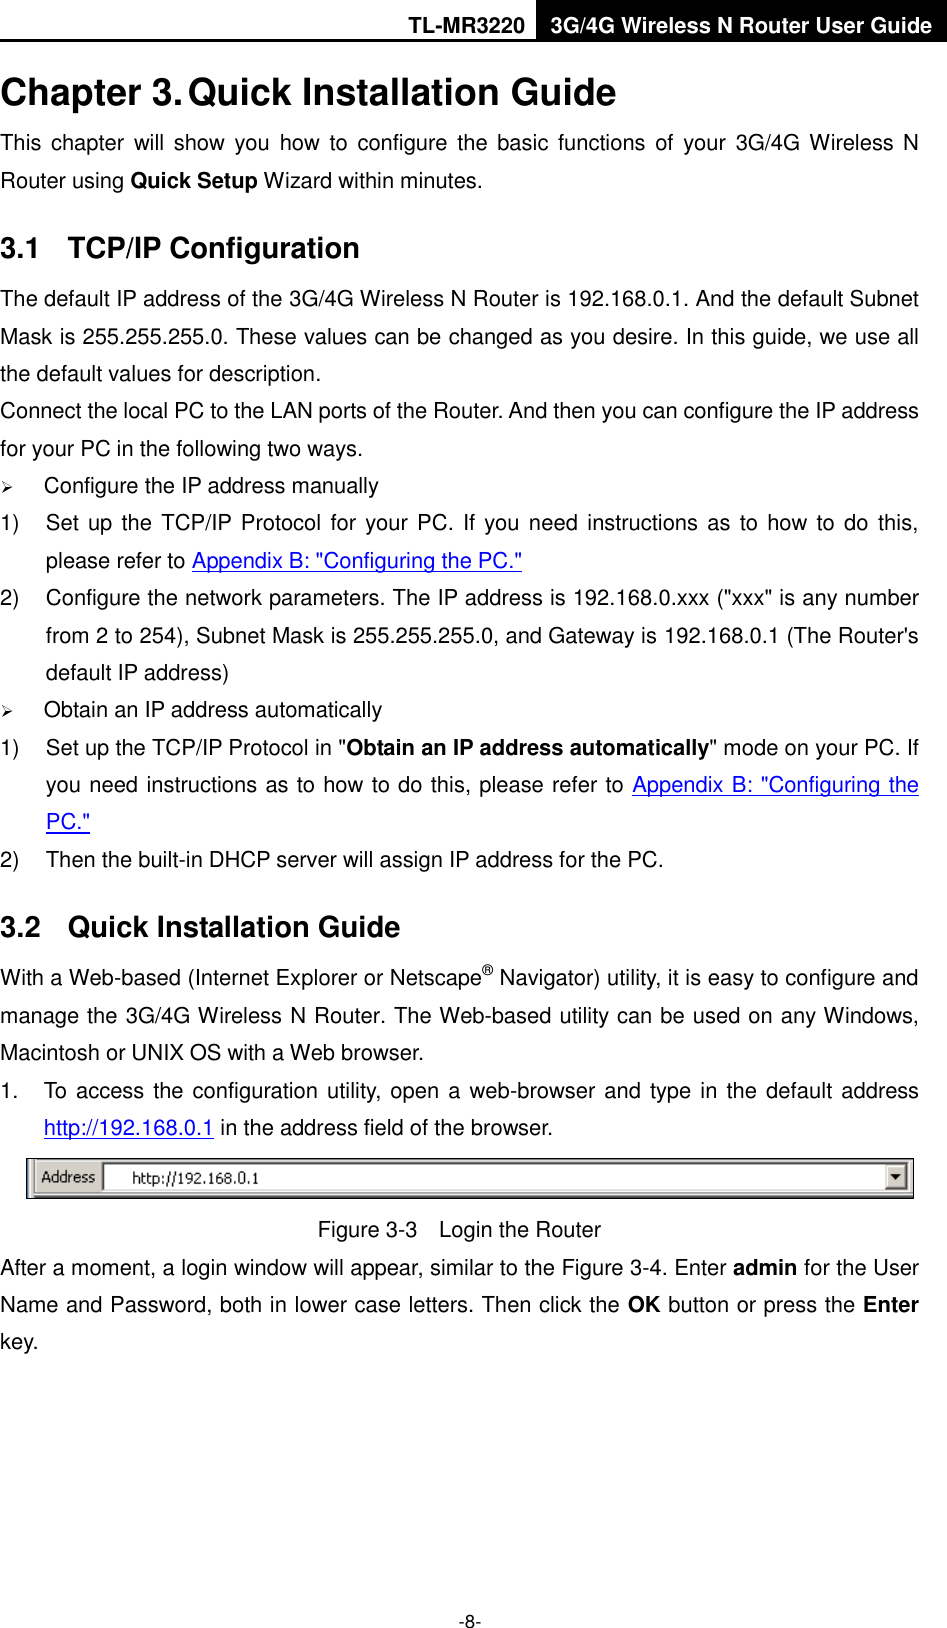 TL-MR3220 3G/4G Wireless N Router User Guide  -8- Chapter 3. Quick Installation Guide This  chapter will show  you  how  to  configure  the basic functions  of  your  3G/4G Wireless N Router using Quick Setup Wizard within minutes. 3.1  TCP/IP Configuration The default IP address of the 3G/4G Wireless N Router is 192.168.0.1. And the default Subnet Mask is 255.255.255.0. These values can be changed as you desire. In this guide, we use all the default values for description. Connect the local PC to the LAN ports of the Router. And then you can configure the IP address for your PC in the following two ways.  Configure the IP address manually 1) Set up  the TCP/IP Protocol for your PC. If you need  instructions as to how to do  this, please refer to Appendix B: &quot;Configuring the PC.&quot; 2)  Configure the network parameters. The IP address is 192.168.0.xxx (&quot;xxx&quot; is any number from 2 to 254), Subnet Mask is 255.255.255.0, and Gateway is 192.168.0.1 (The Router&apos;s default IP address)  Obtain an IP address automatically 1)  Set up the TCP/IP Protocol in &quot;Obtain an IP address automatically&quot; mode on your PC. If you need instructions as to how to do this, please refer to Appendix B: &quot;Configuring the PC.&quot; 2)  Then the built-in DHCP server will assign IP address for the PC. 3.2  Quick Installation Guide With a Web-based (Internet Explorer or Netscape® Navigator) utility, it is easy to configure and manage the 3G/4G Wireless N Router. The Web-based utility can be used on any Windows, Macintosh or UNIX OS with a Web browser. 1.  To access the configuration utility, open a web-browser and type in  the default address http://192.168.0.1 in the address field of the browser.  Figure 3-3  Login the Router After a moment, a login window will appear, similar to the Figure 3-4. Enter admin for the User Name and Password, both in lower case letters. Then click the OK button or press the Enter key. 